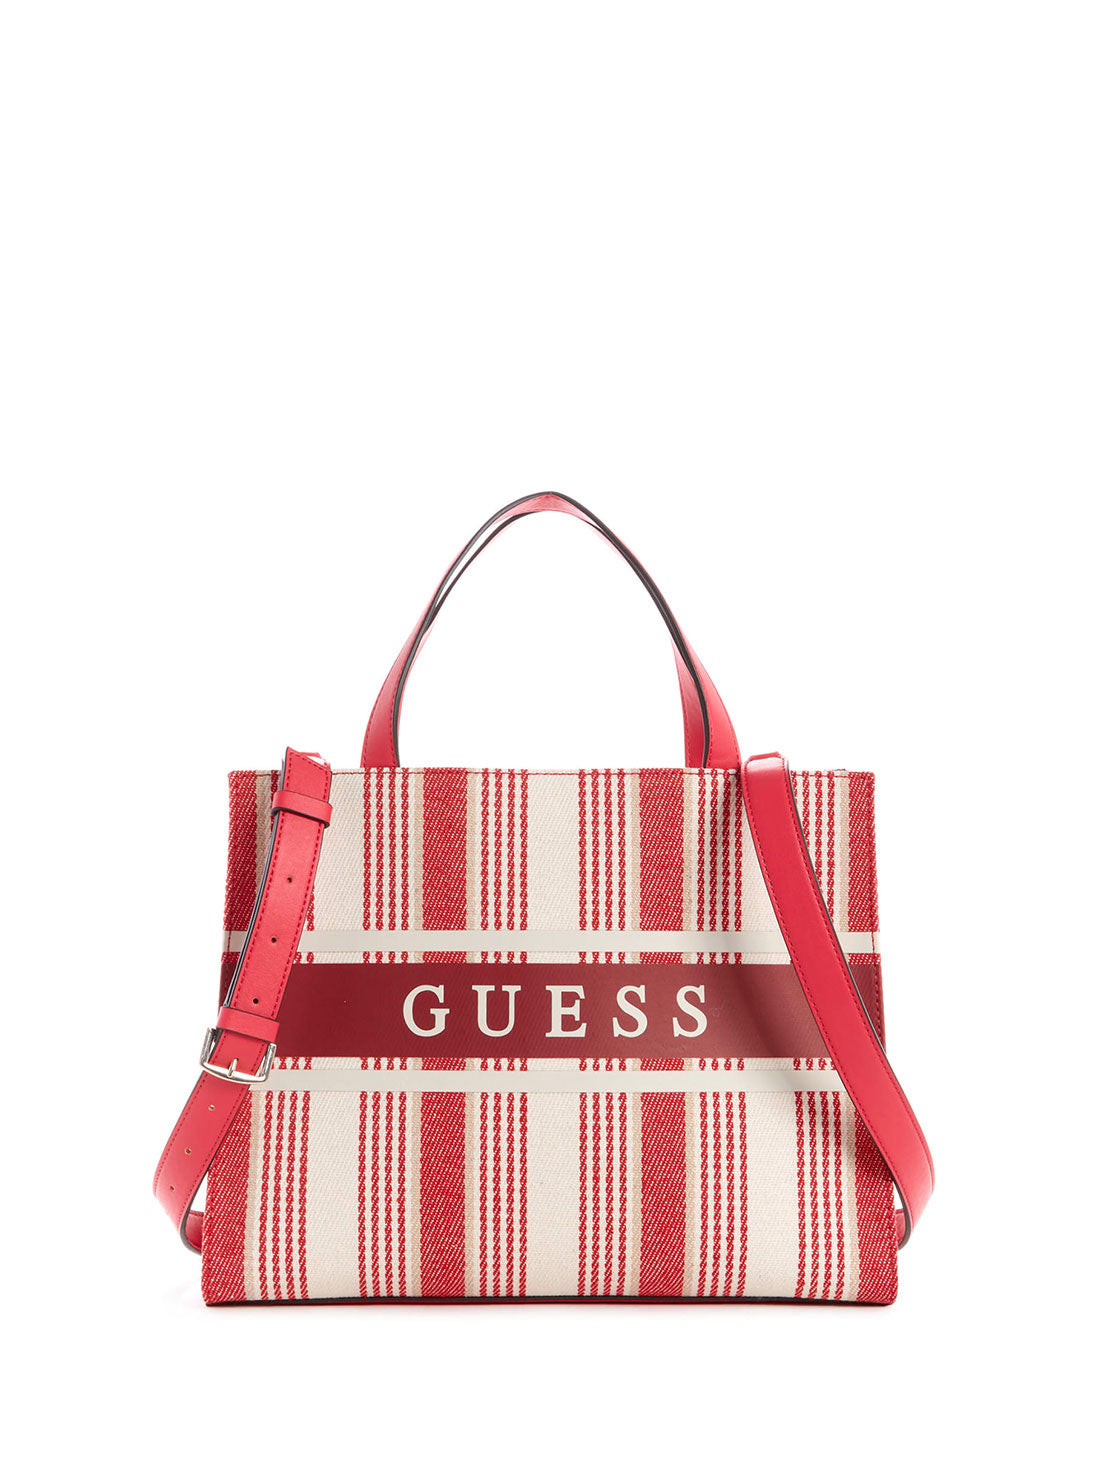 GUESS Red Stripe Monique Small Tote Bag front view